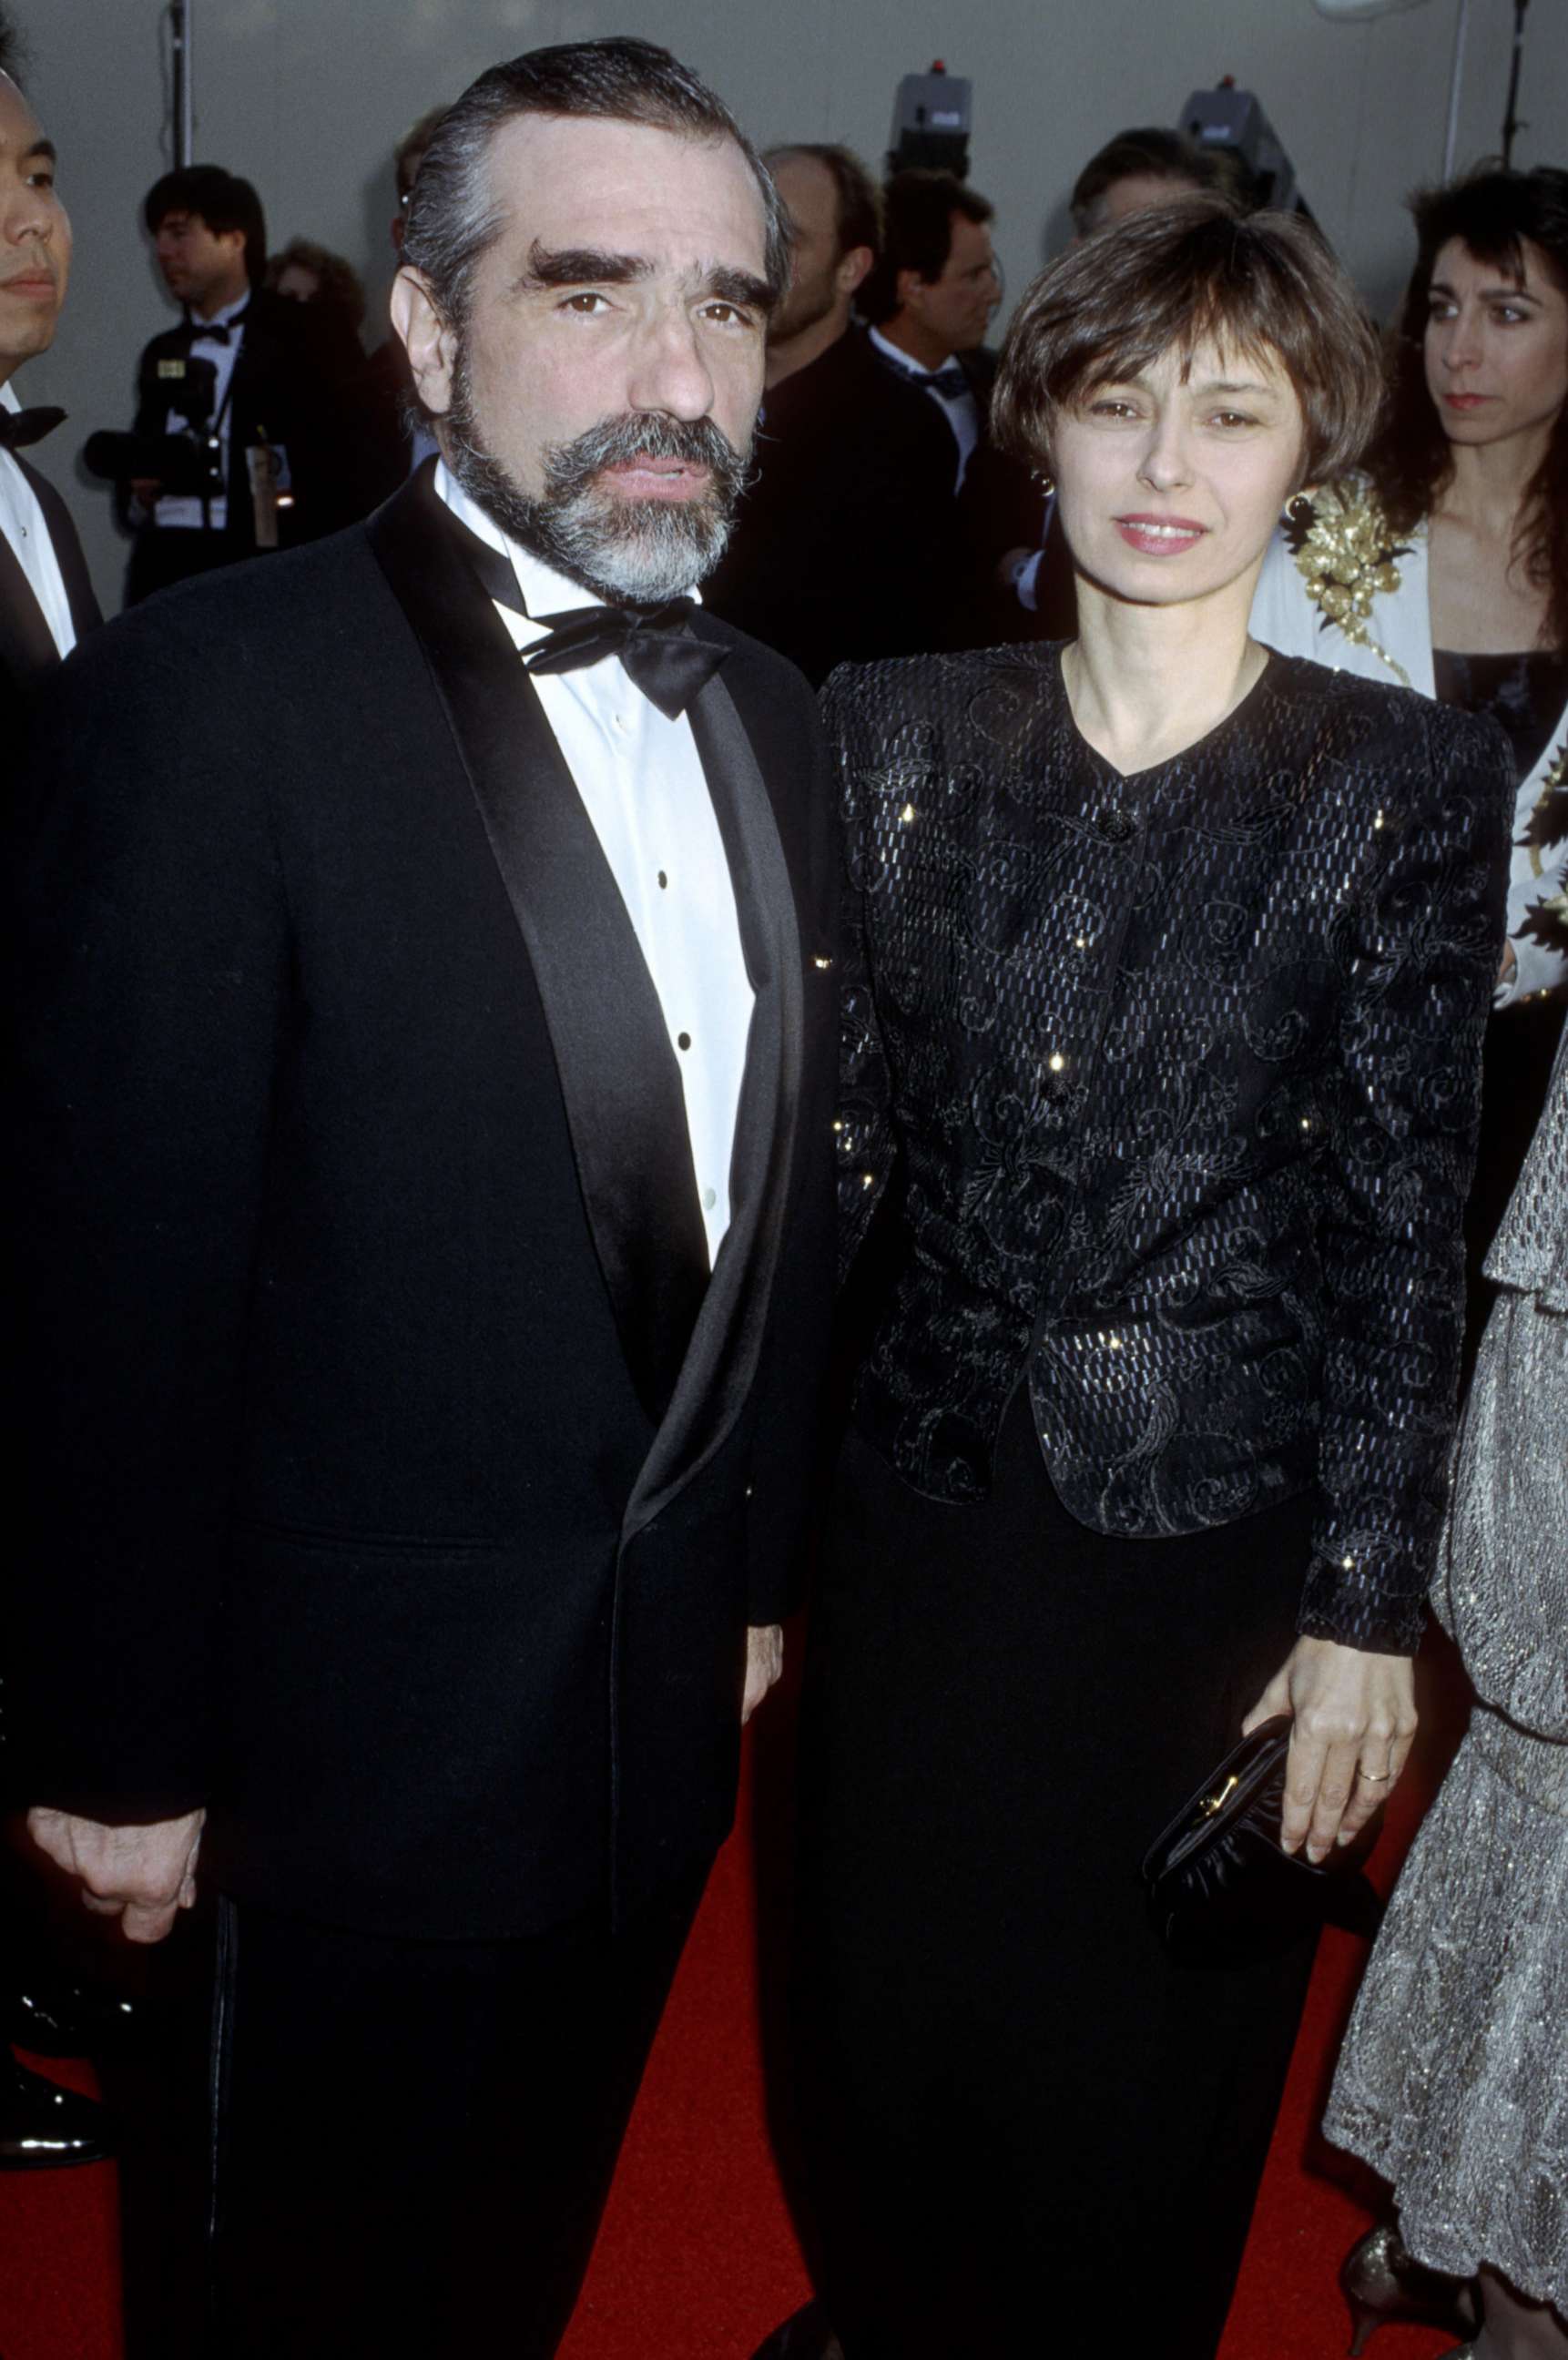 PHOTO: Martin Scorsese and Barbara De Fina during 62nd Annual Academy Awards at Music Center in Los Angeles, California, United States. (Photo by Ron Galella, Ltd./Ron Galella Collection via Getty Images)